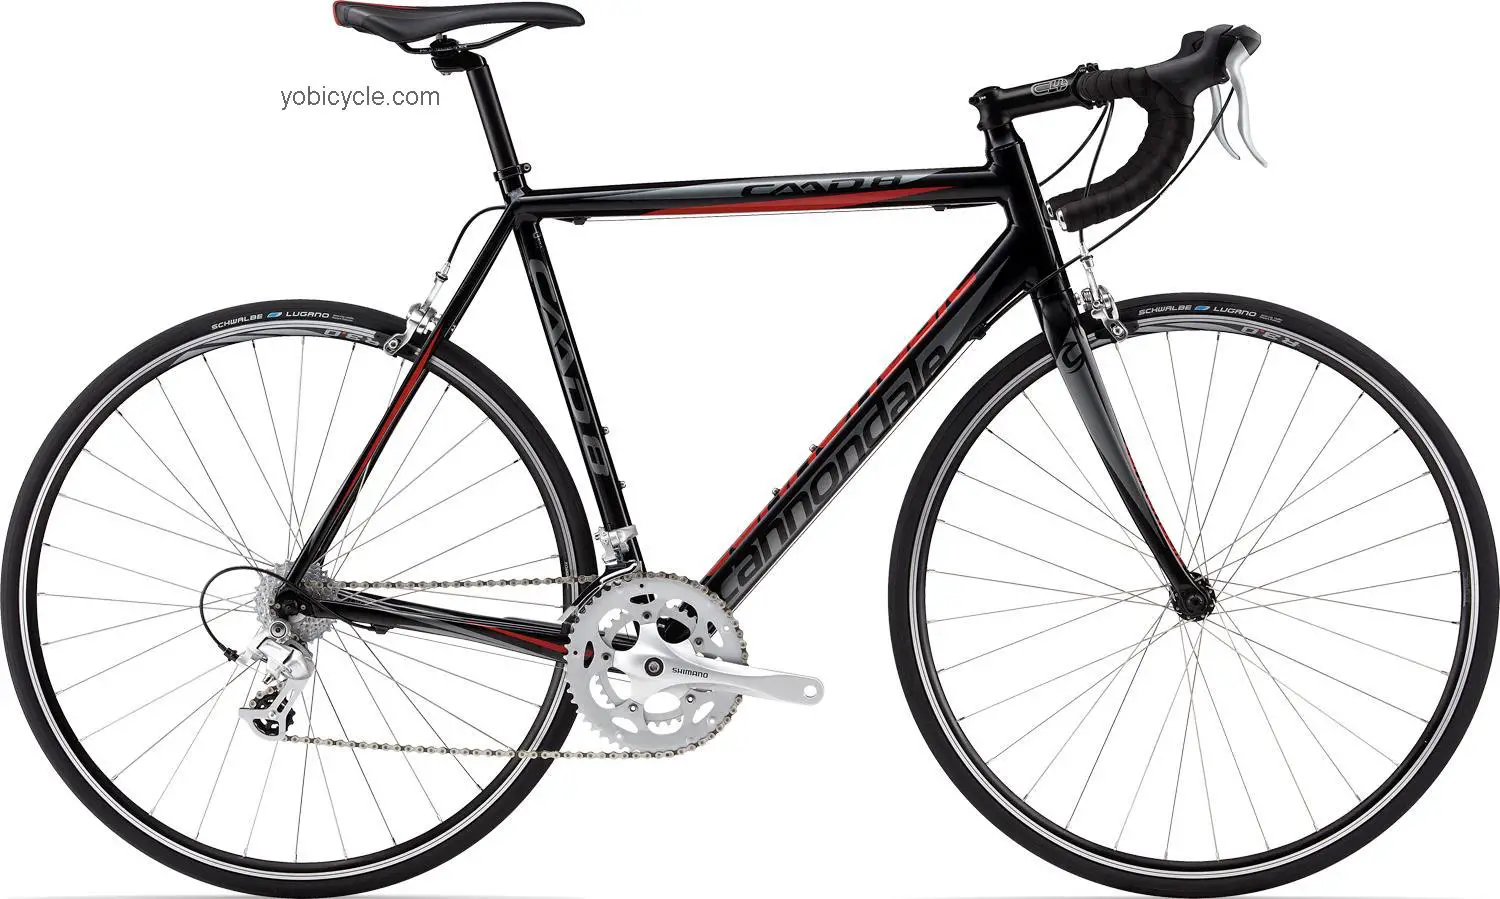 Cannondale CAAD8 2300 2013 comparison online with competitors